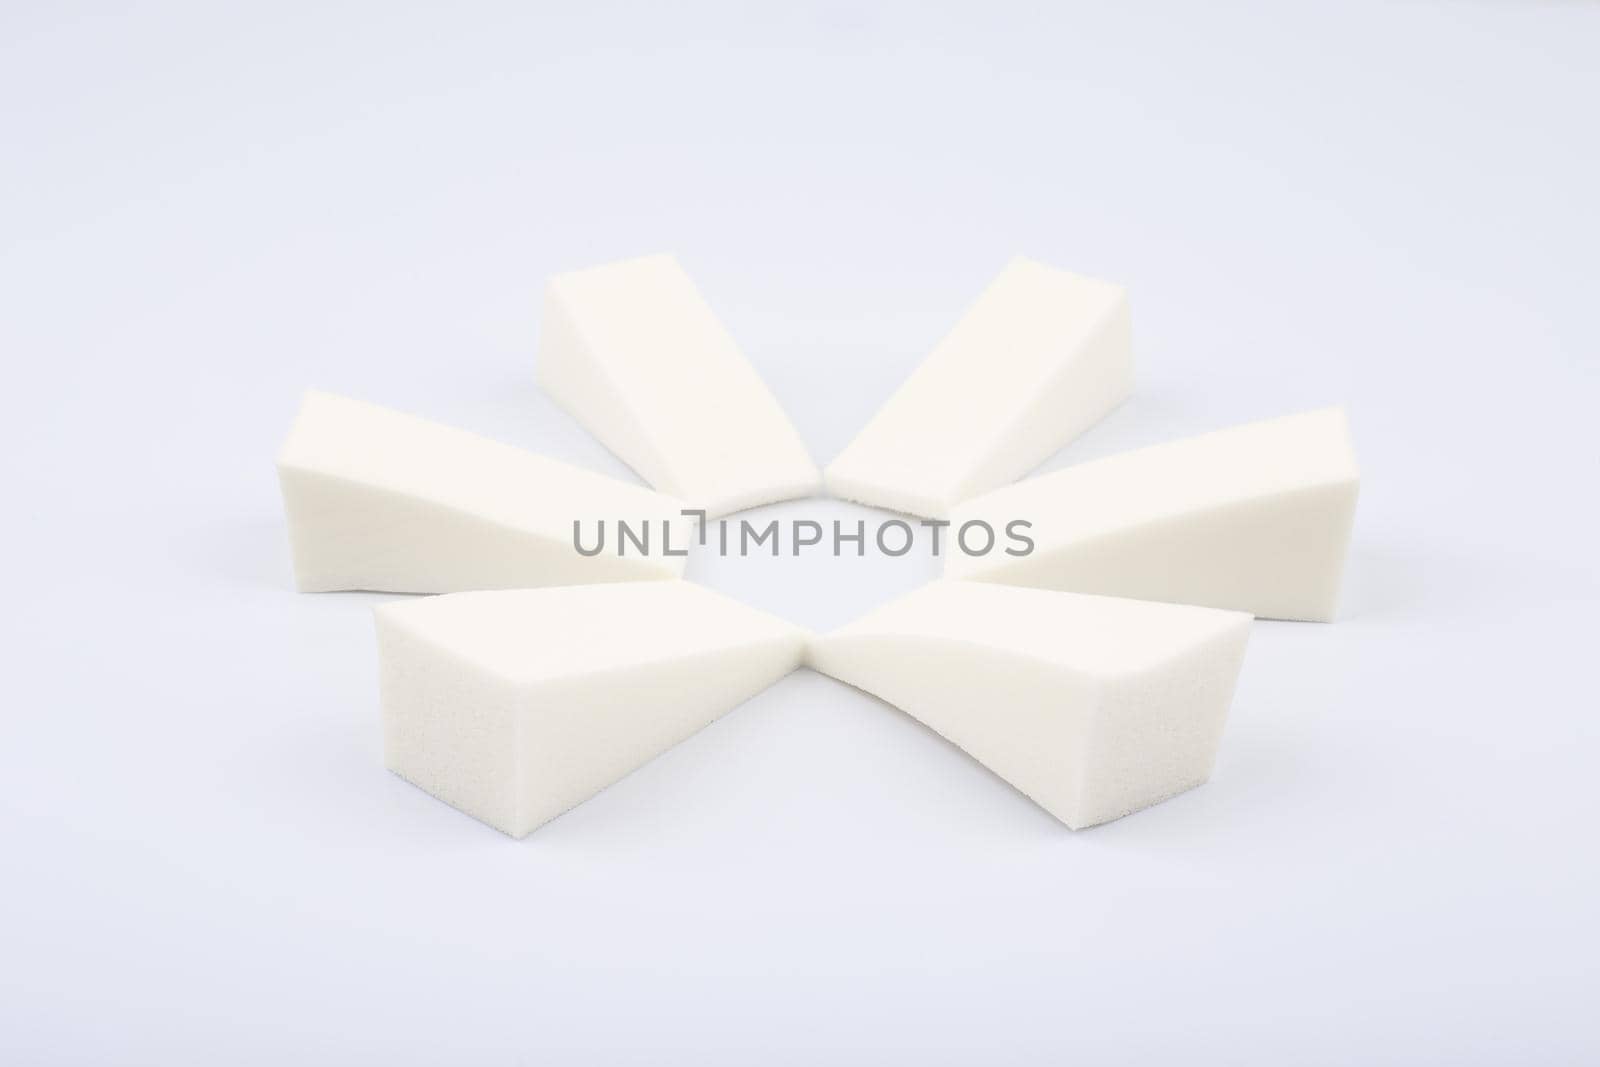 Triangle shaped make up sponges arranged in a circle on white background. Concept of visage and beauty blenders by Senorina_Irina